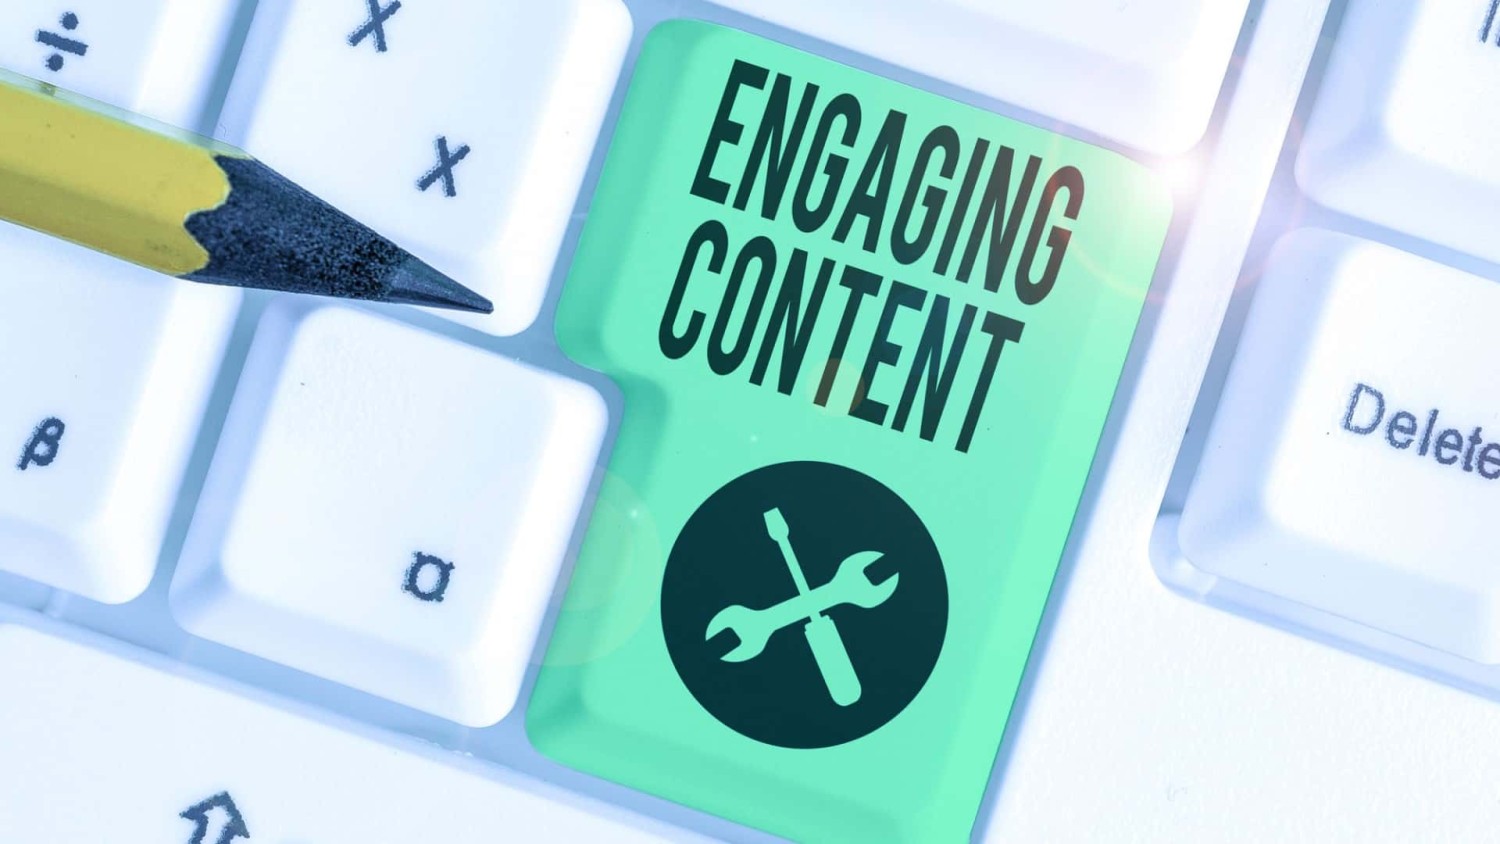 Freelance Business Blogging Creating Engaging Content